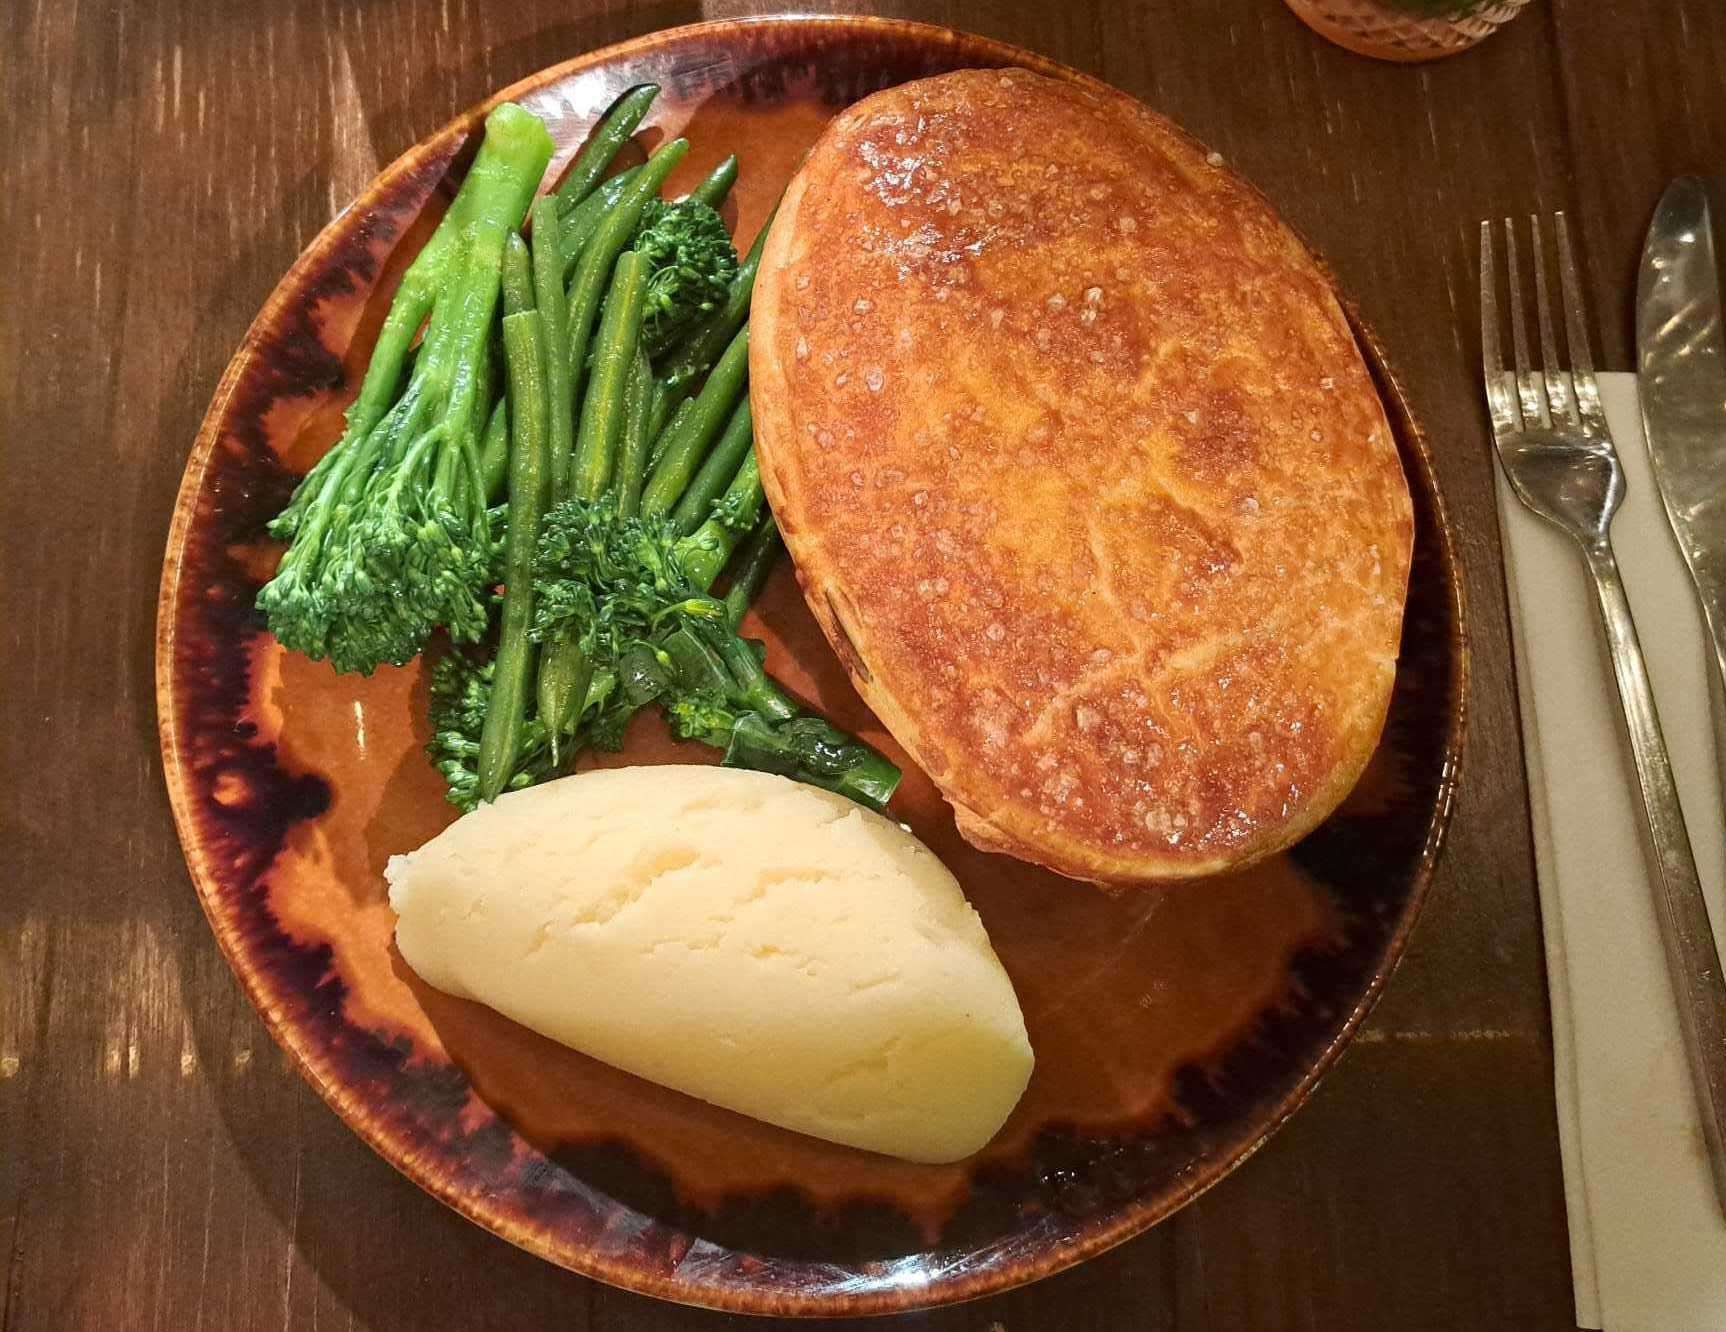 Steak and ale pie with buttered mash and steamed greens